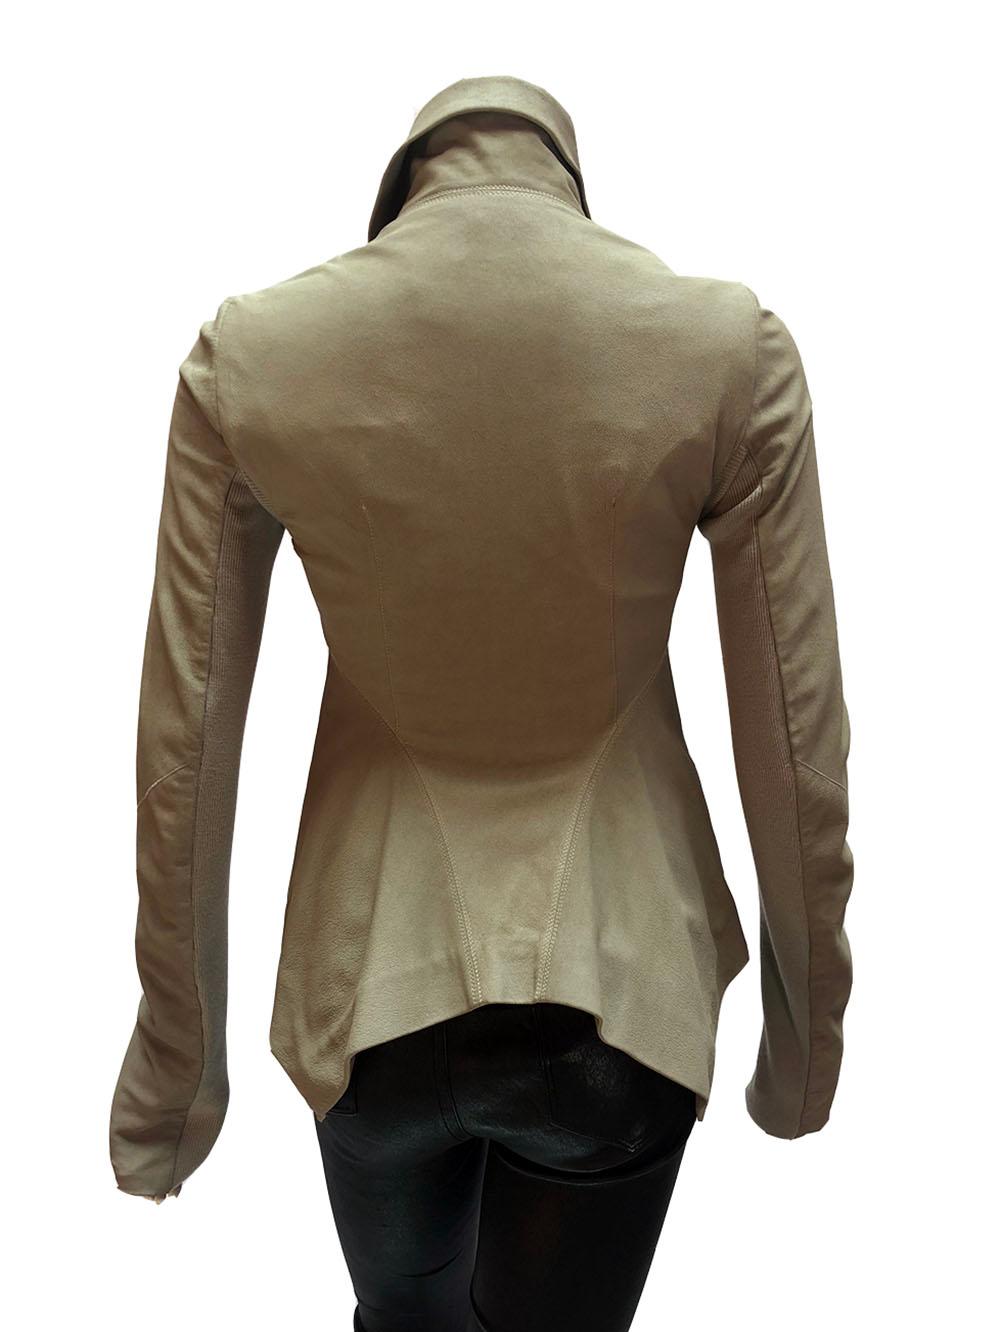 Rick Owens taupe suede moto jacket with high collar, asymmetrical zipper, and ribbed knitting under the arms. Size 6. 